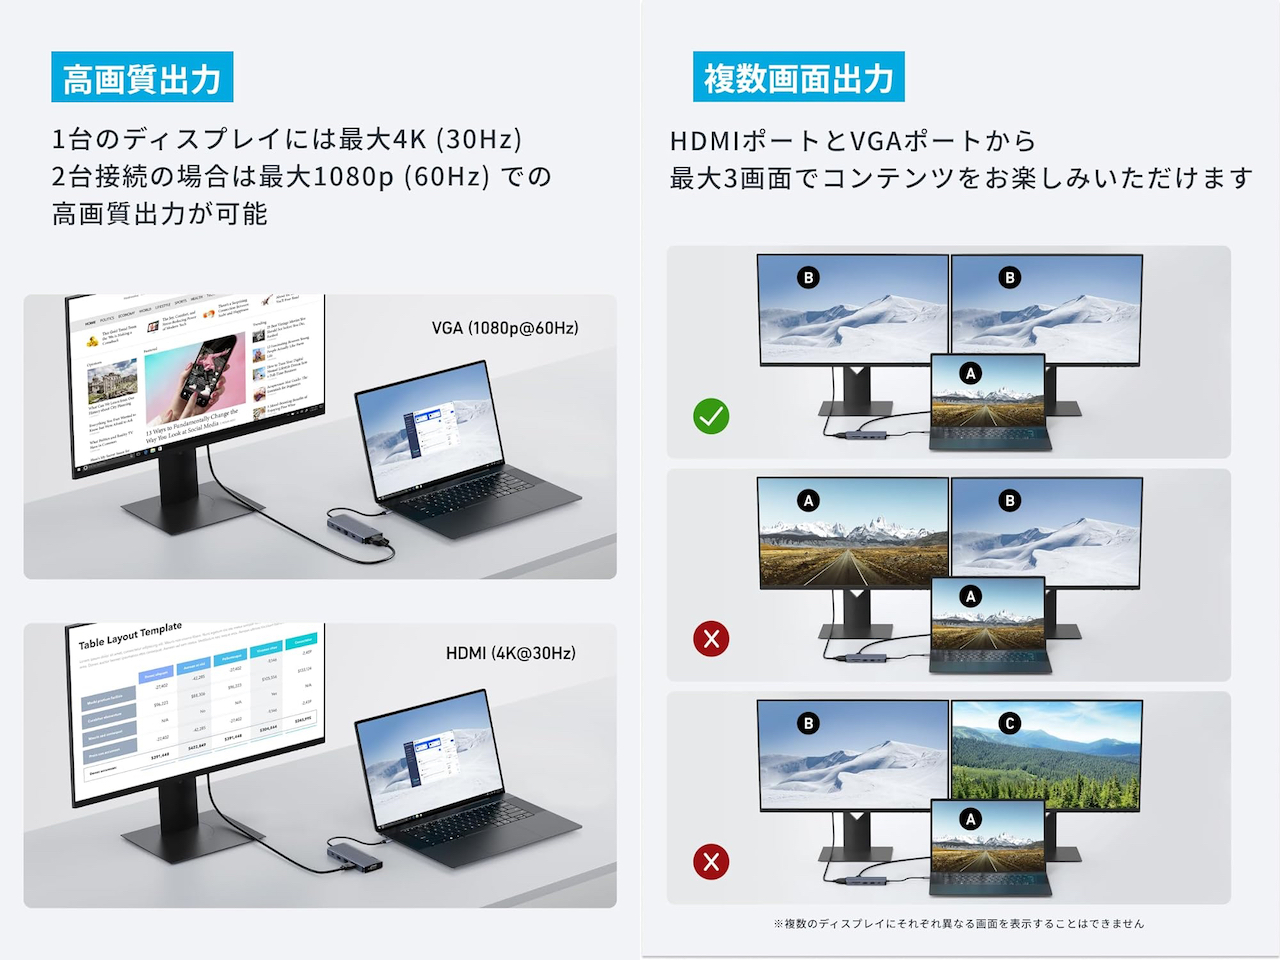 Anker USB-C ハブ (10-in-1, Dual Display)